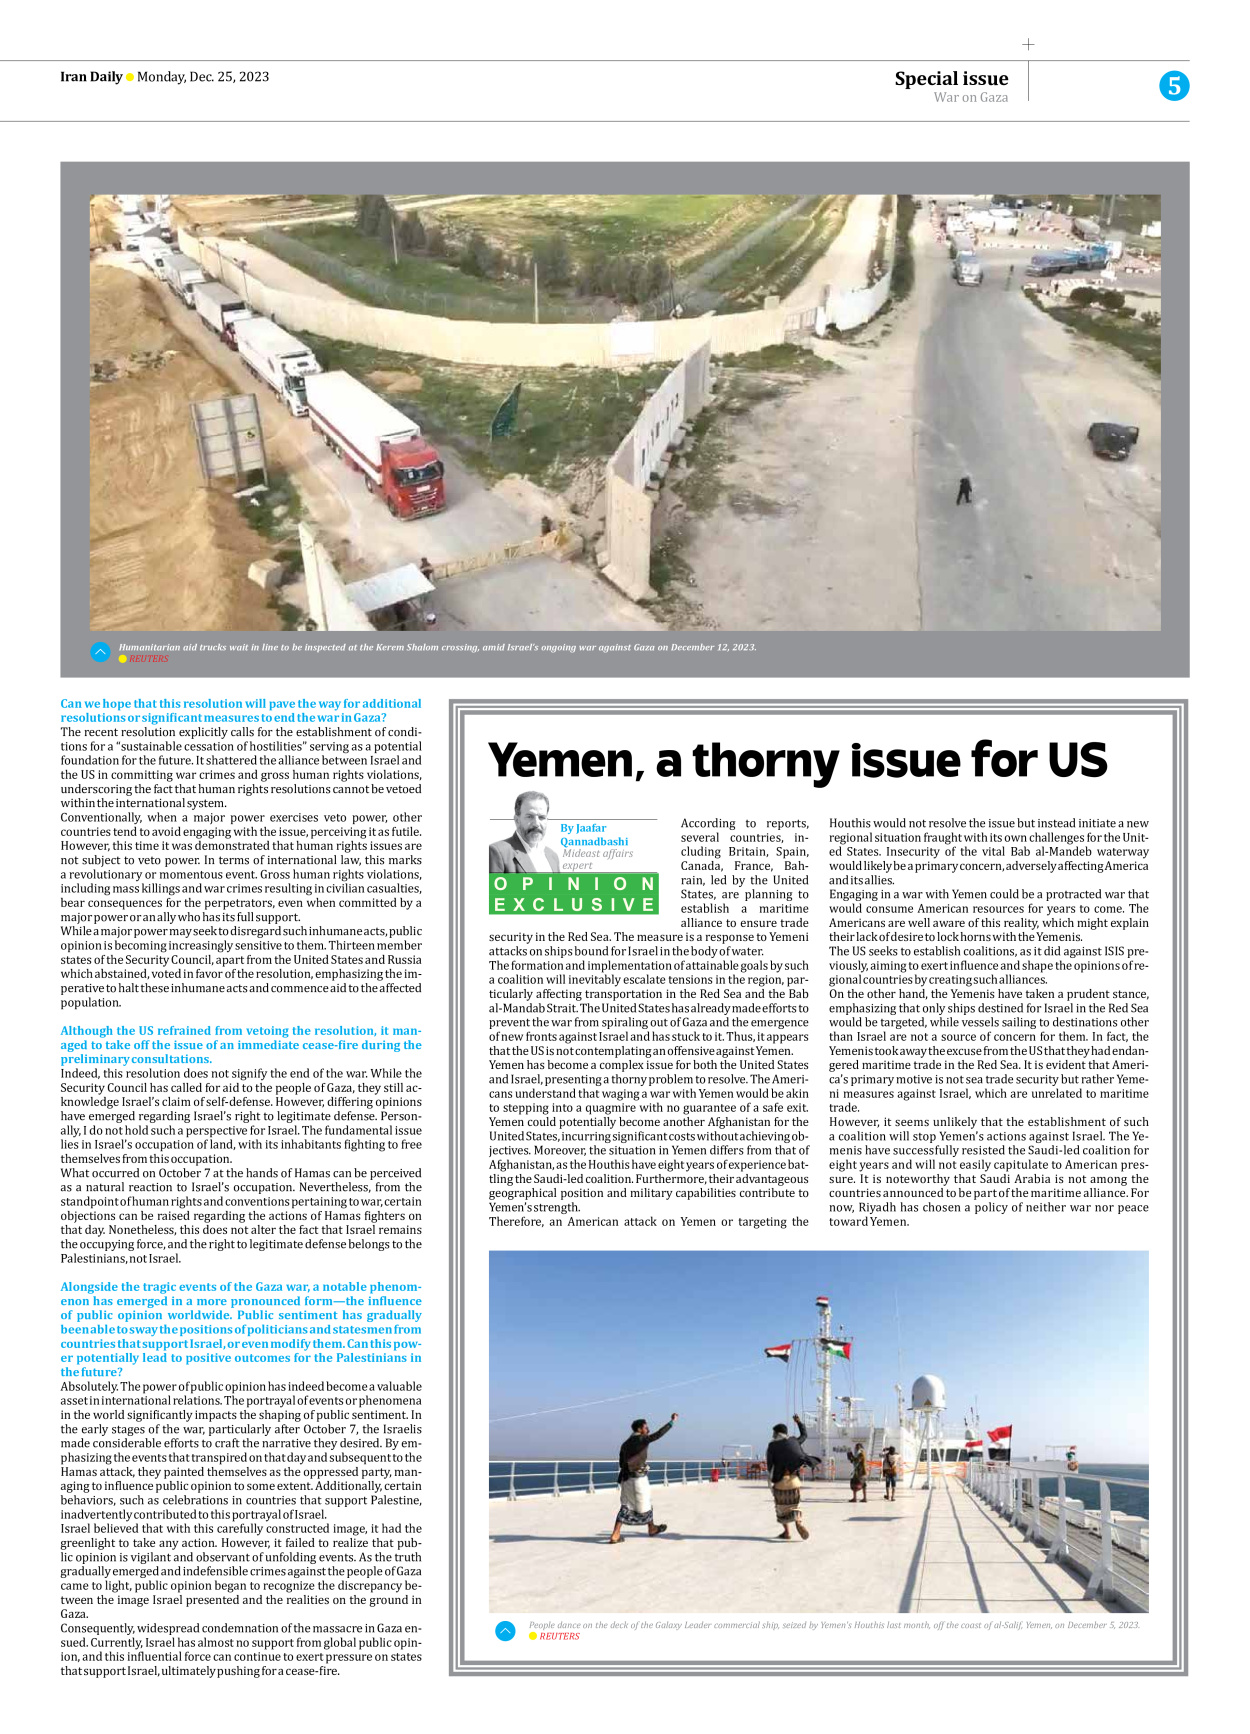 Iran Daily - Number Seven Thousand Four Hundred and Sixty Seven - 25 December 2023 - Page 5